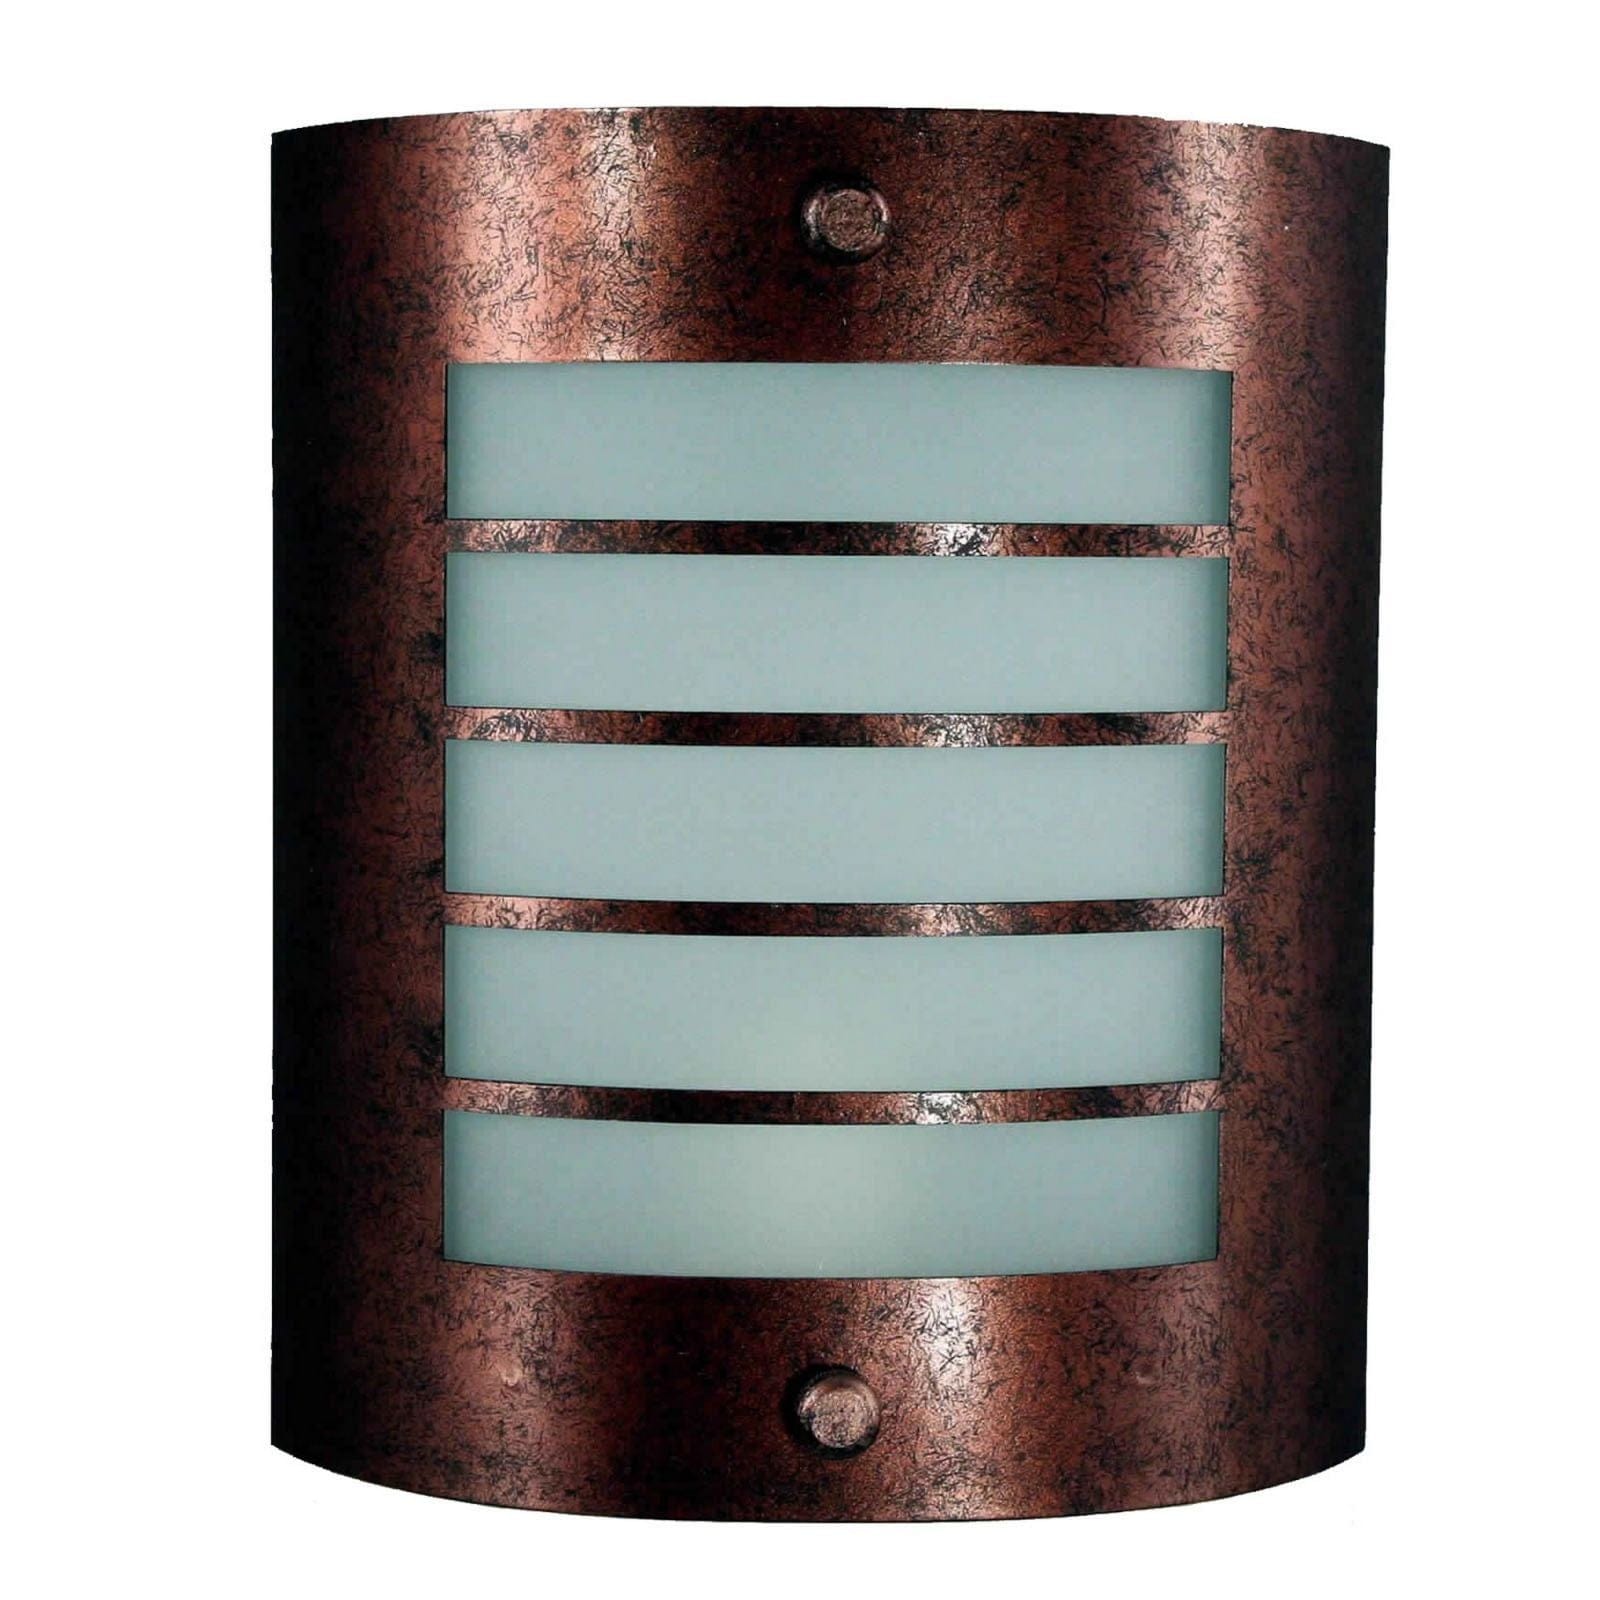 Benzara 18W Wall Lamp With Acrylic Plate And Cut Out Frame, Rustic Brown And White By Benzara Wall Lamps BM220701